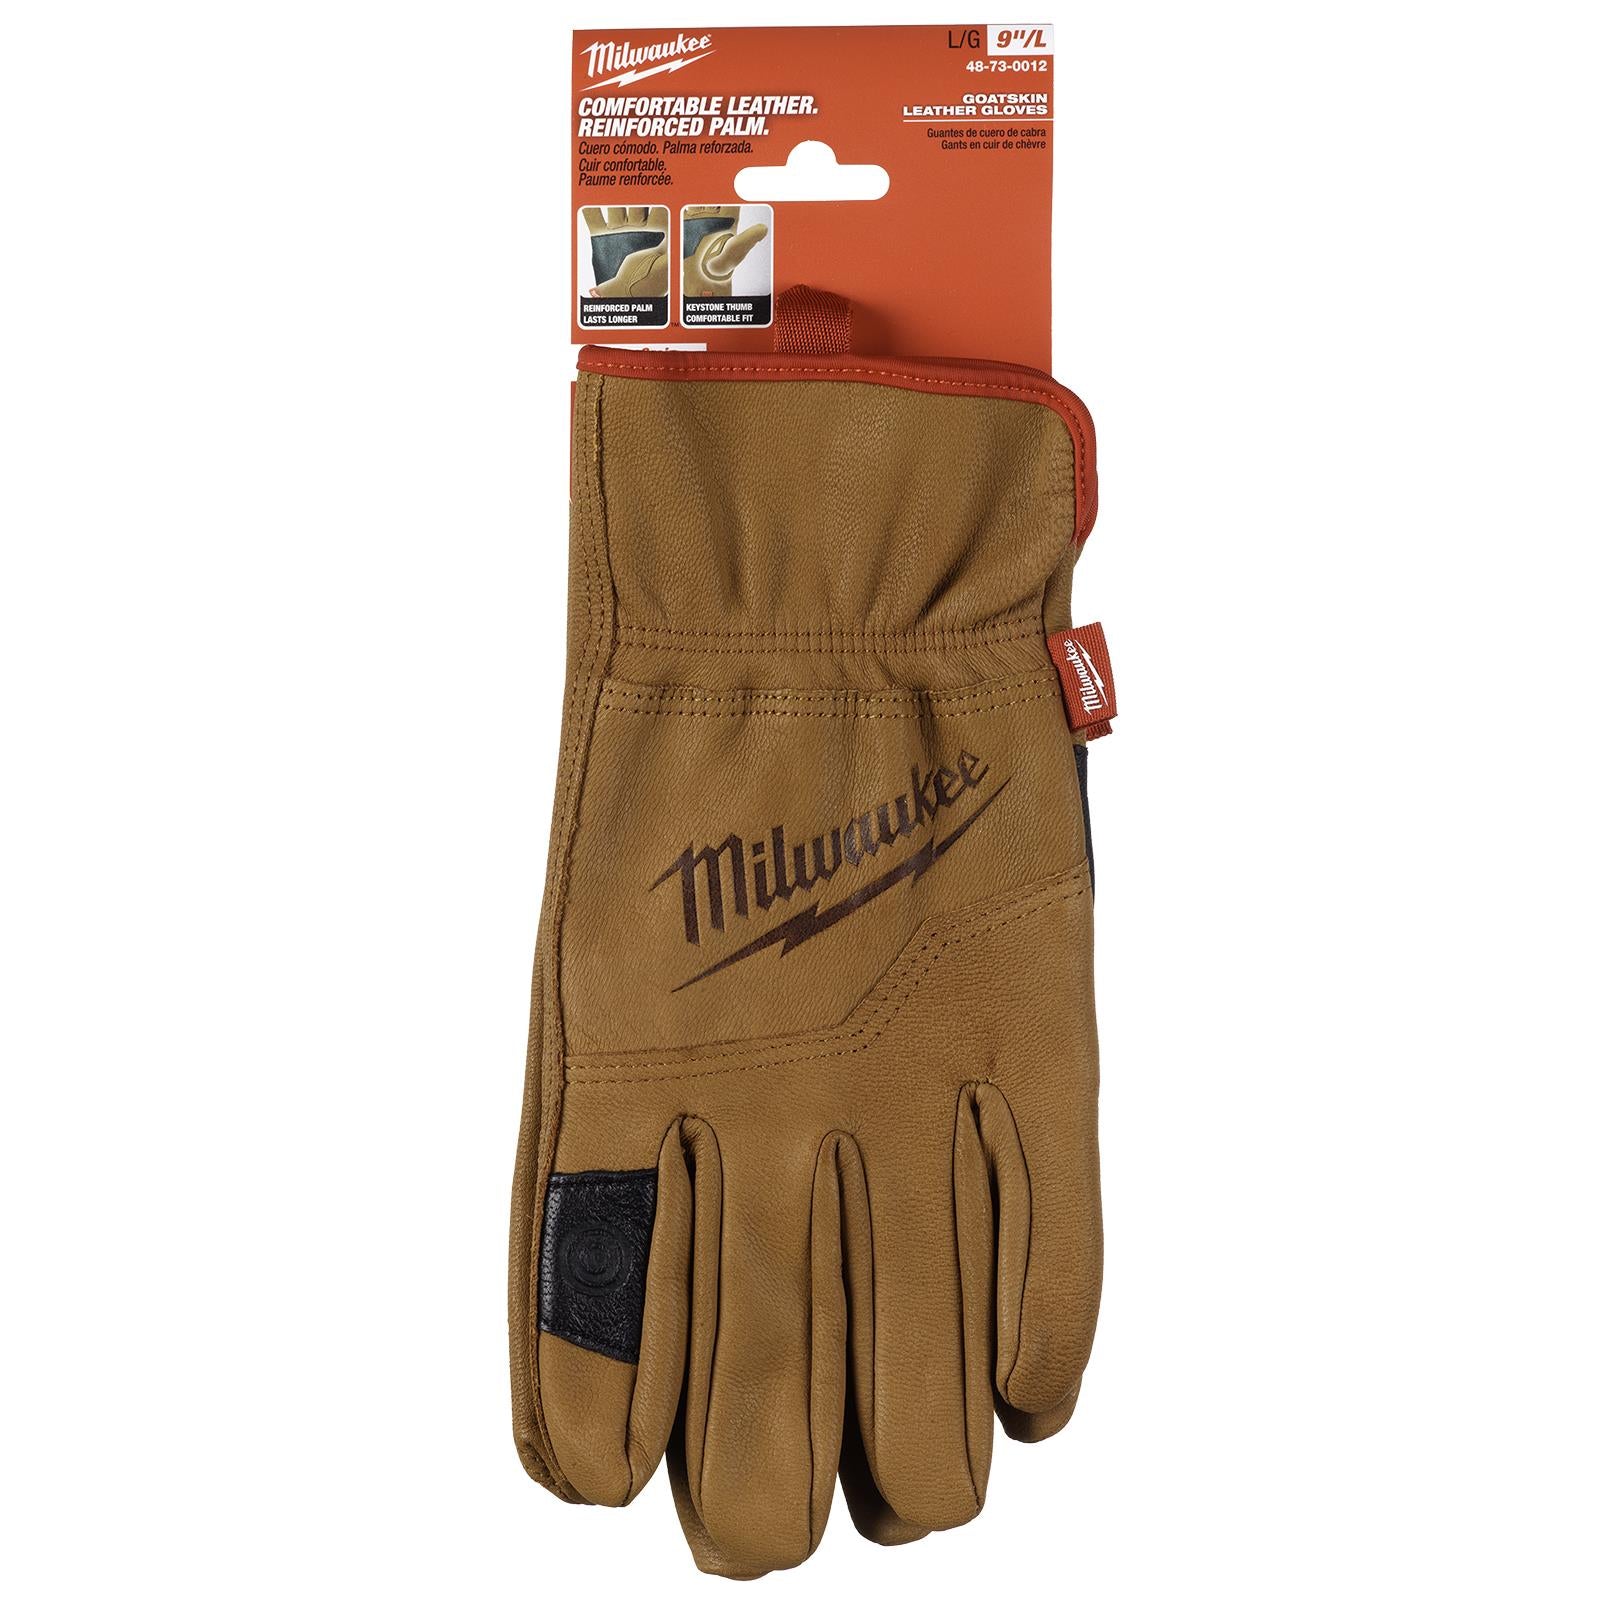 Milwaukee Safety Gloves Goatskin Leather Glove Brown Size 10 / XL Extra Large